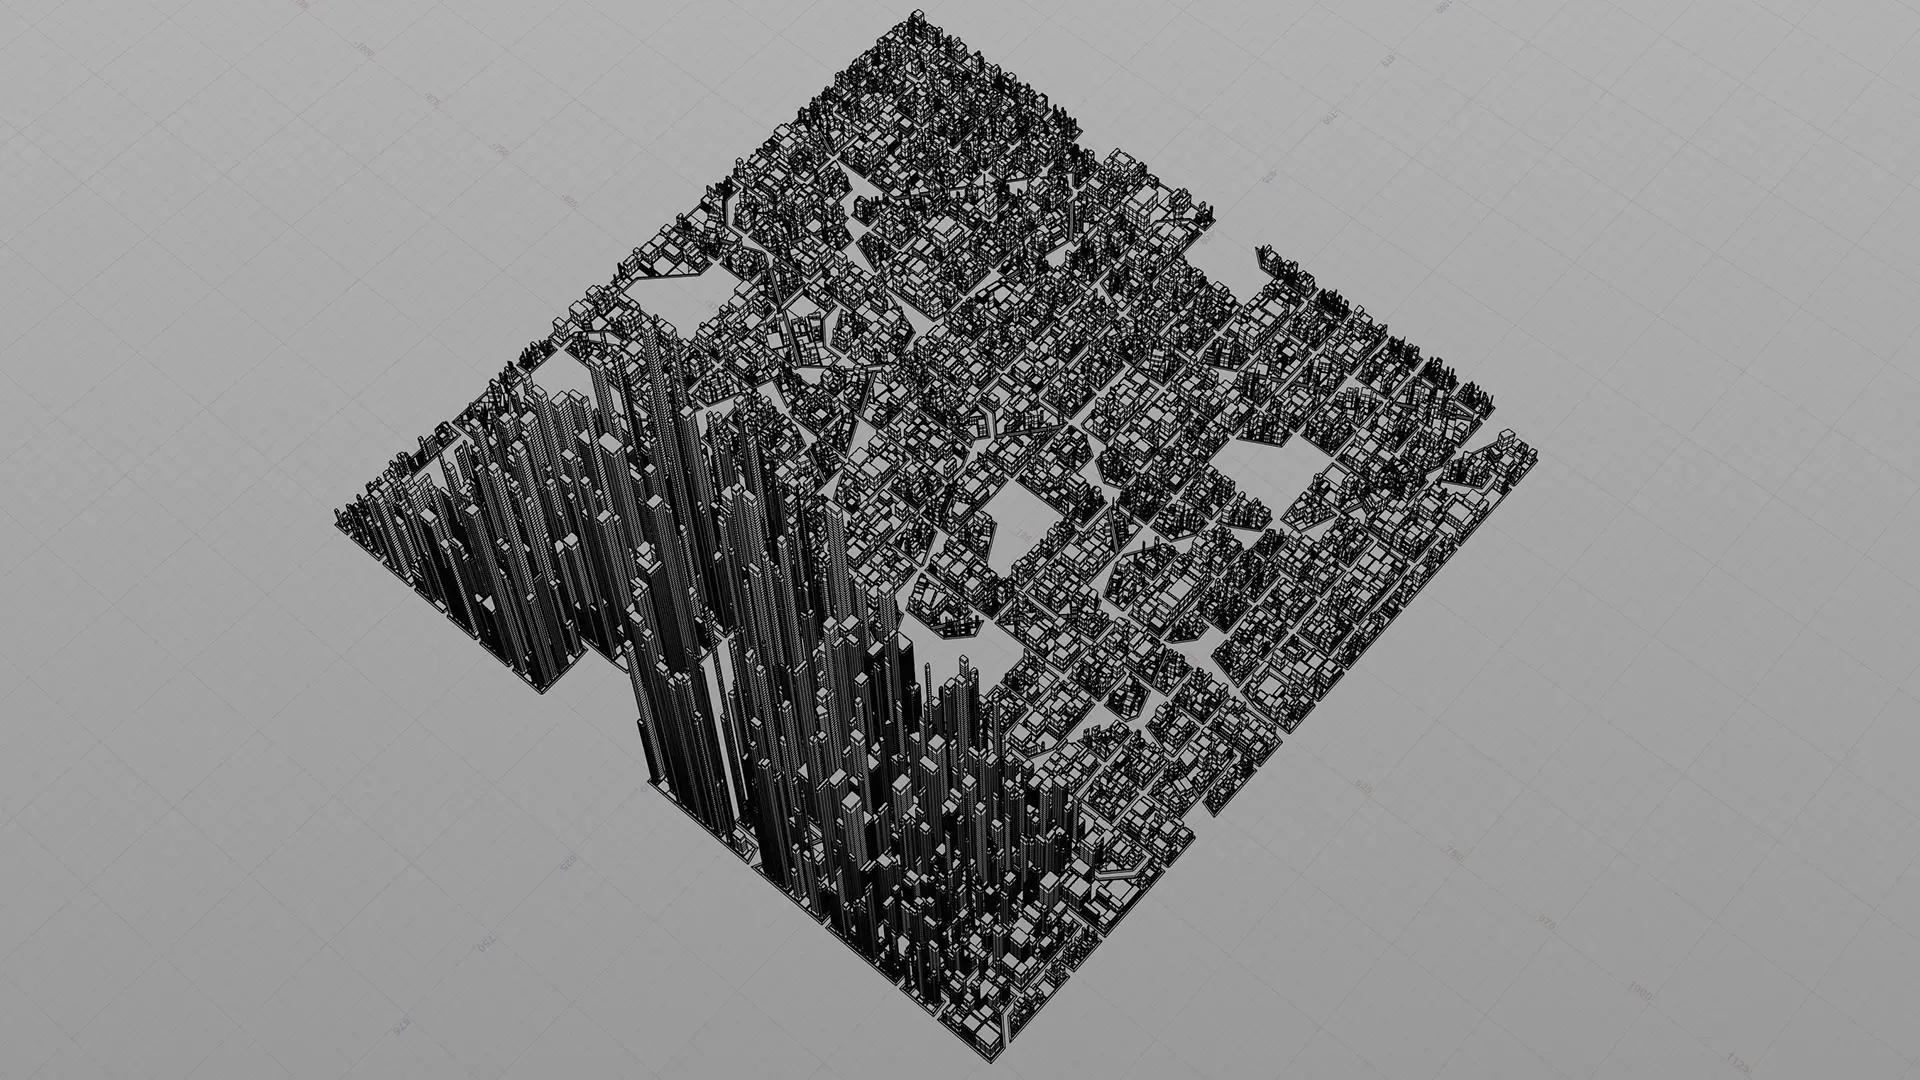 3D Modeled Cities Built Procedurally with Houdini